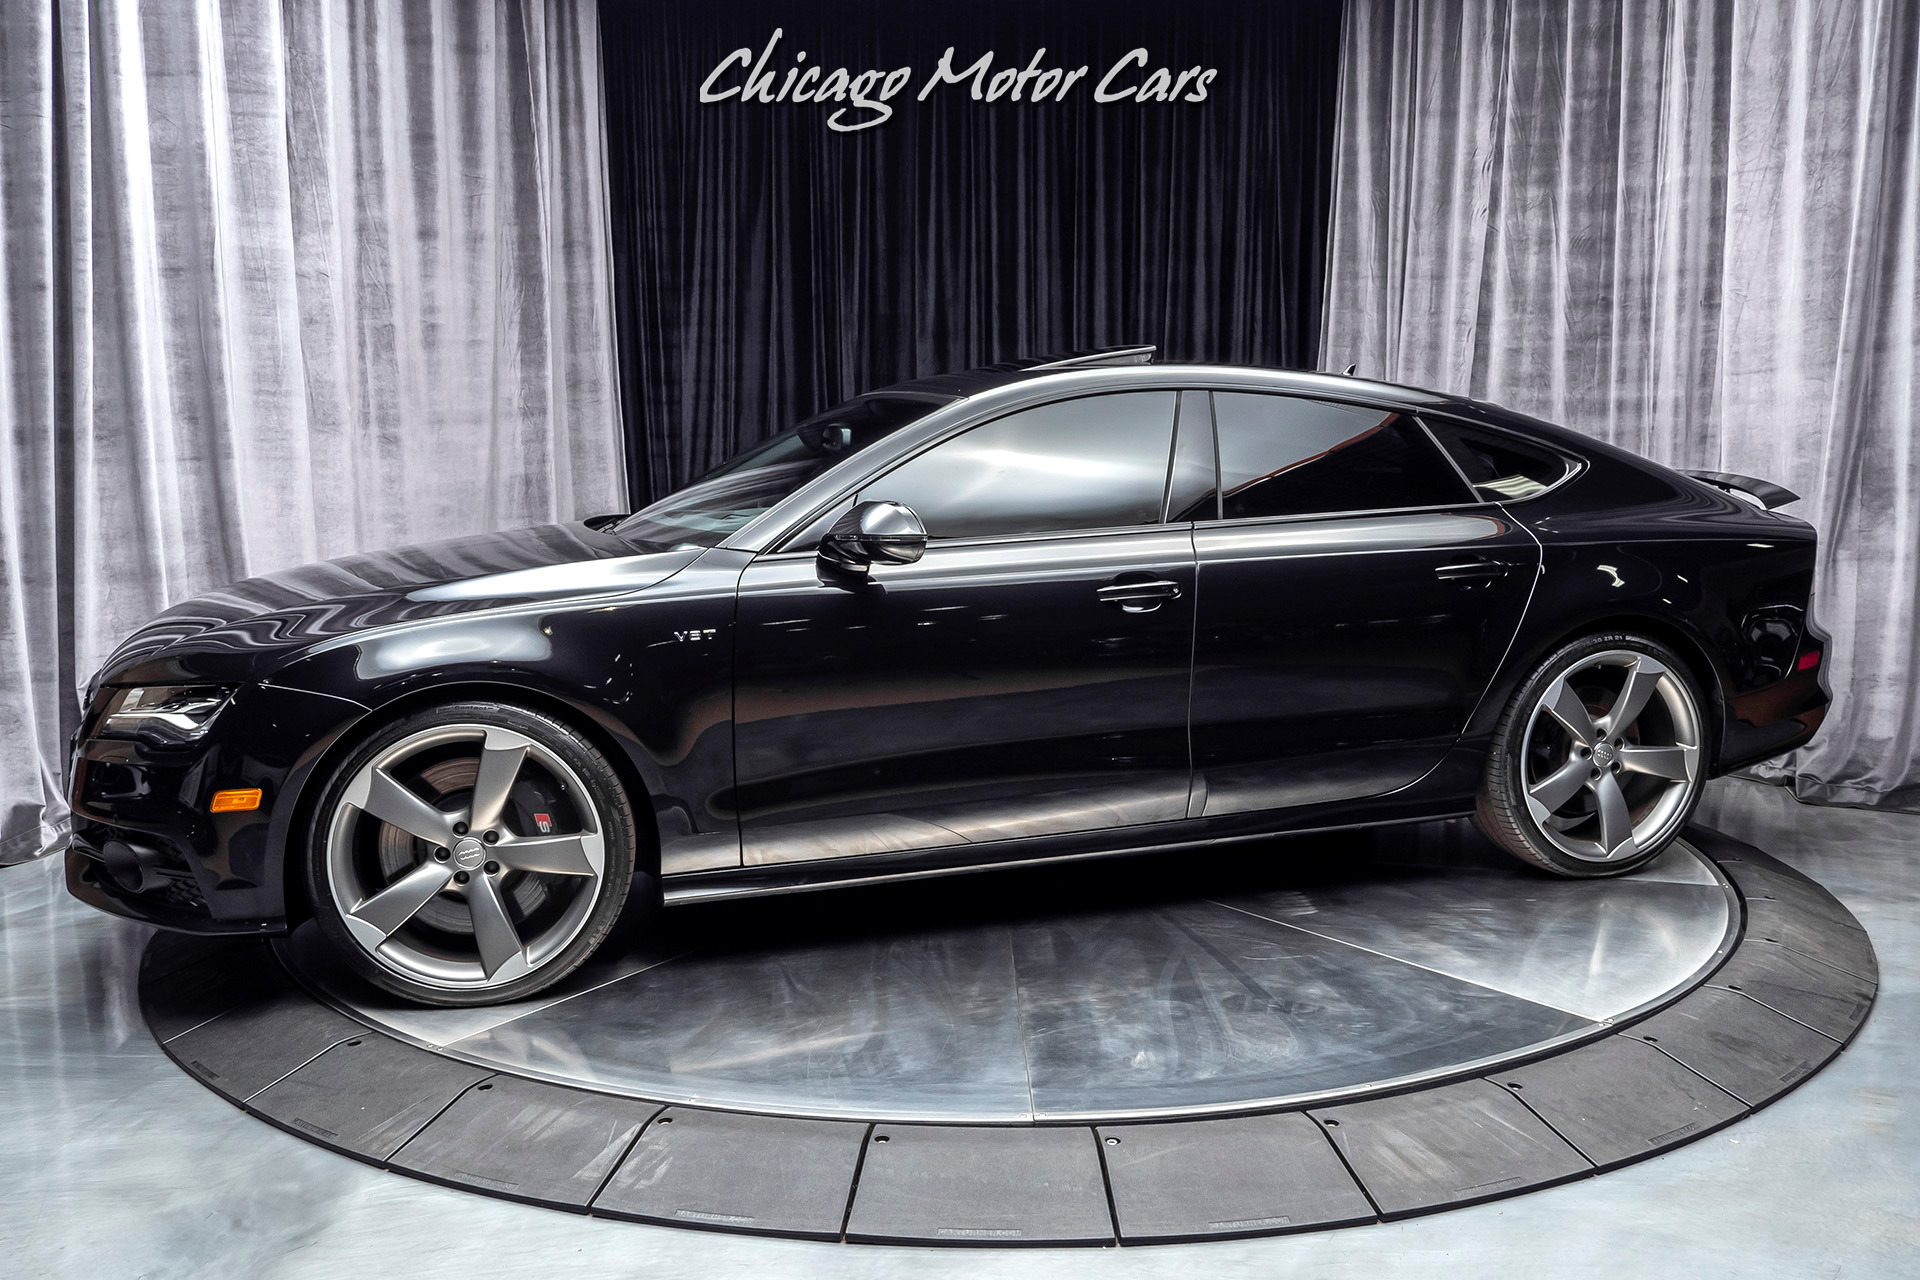 Used 2015 Audi S7 4.0T quattro S tronic Hatchback MSRP $100,190 For Sale  (Special Pricing) | Chicago Motor Cars Stock #16199